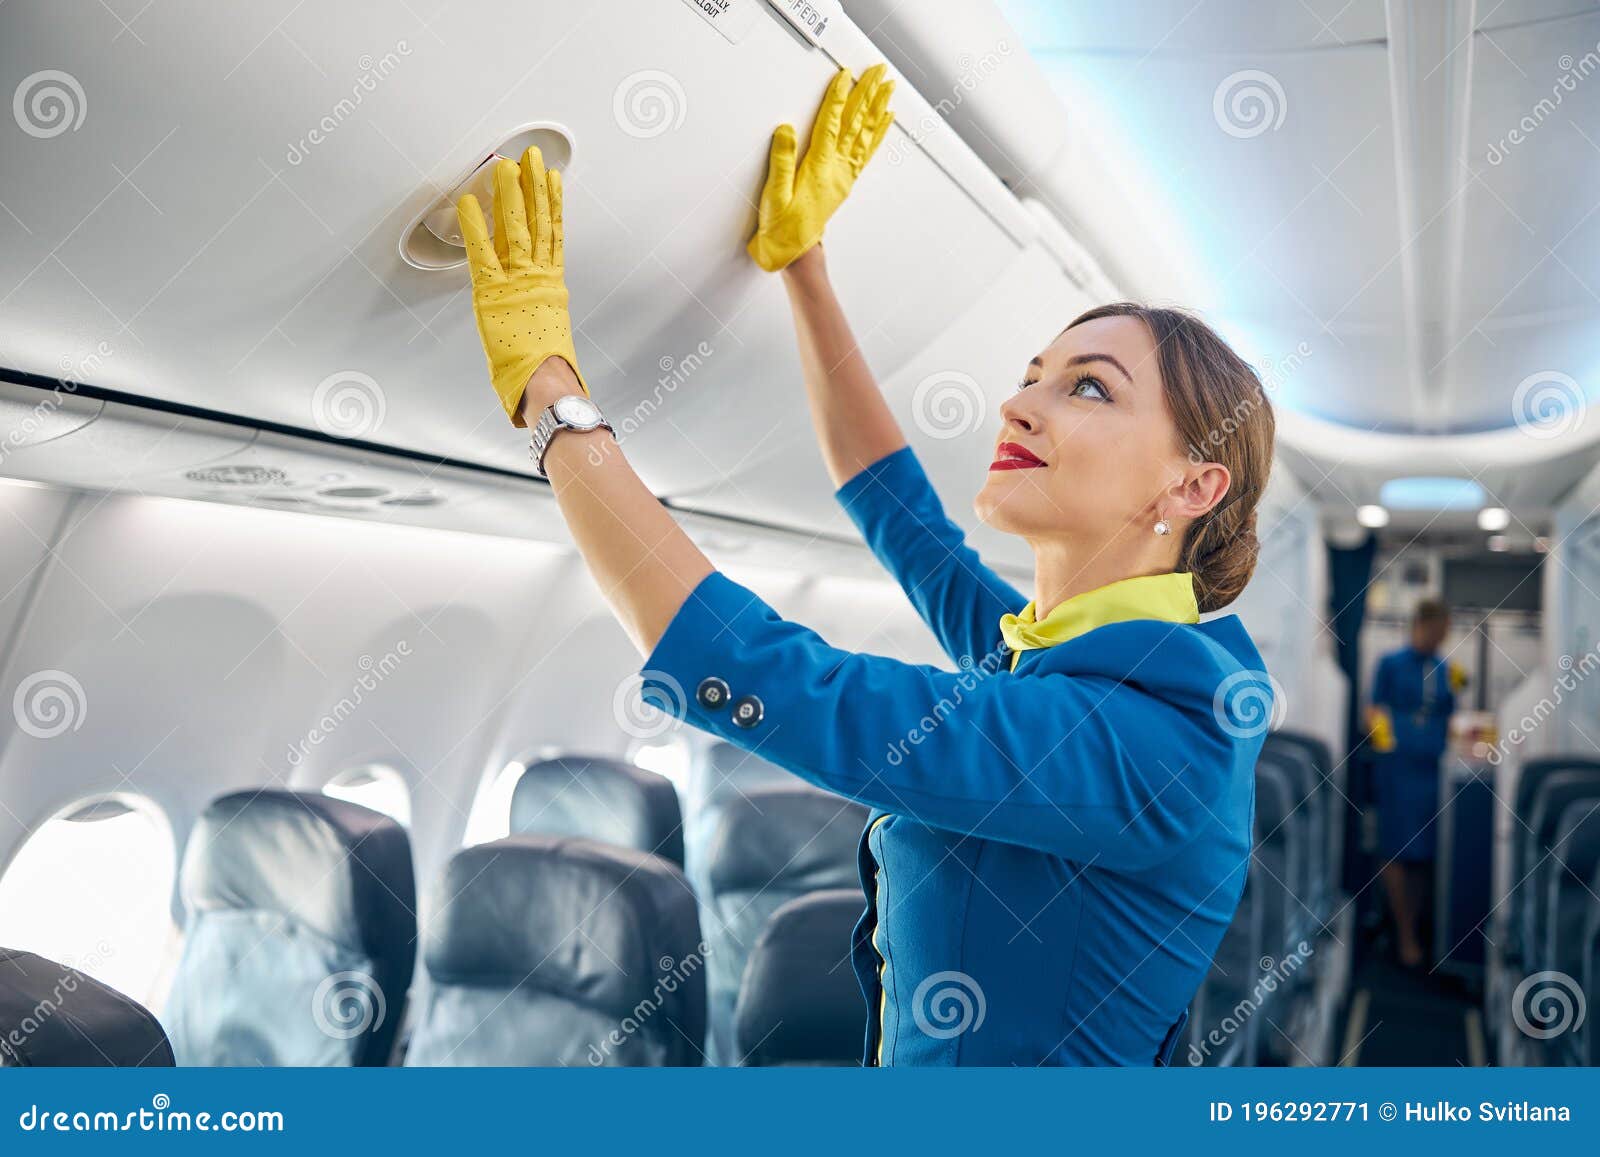 Charming Air Hostess Learning Closing Compartment with Hand Luggage ...